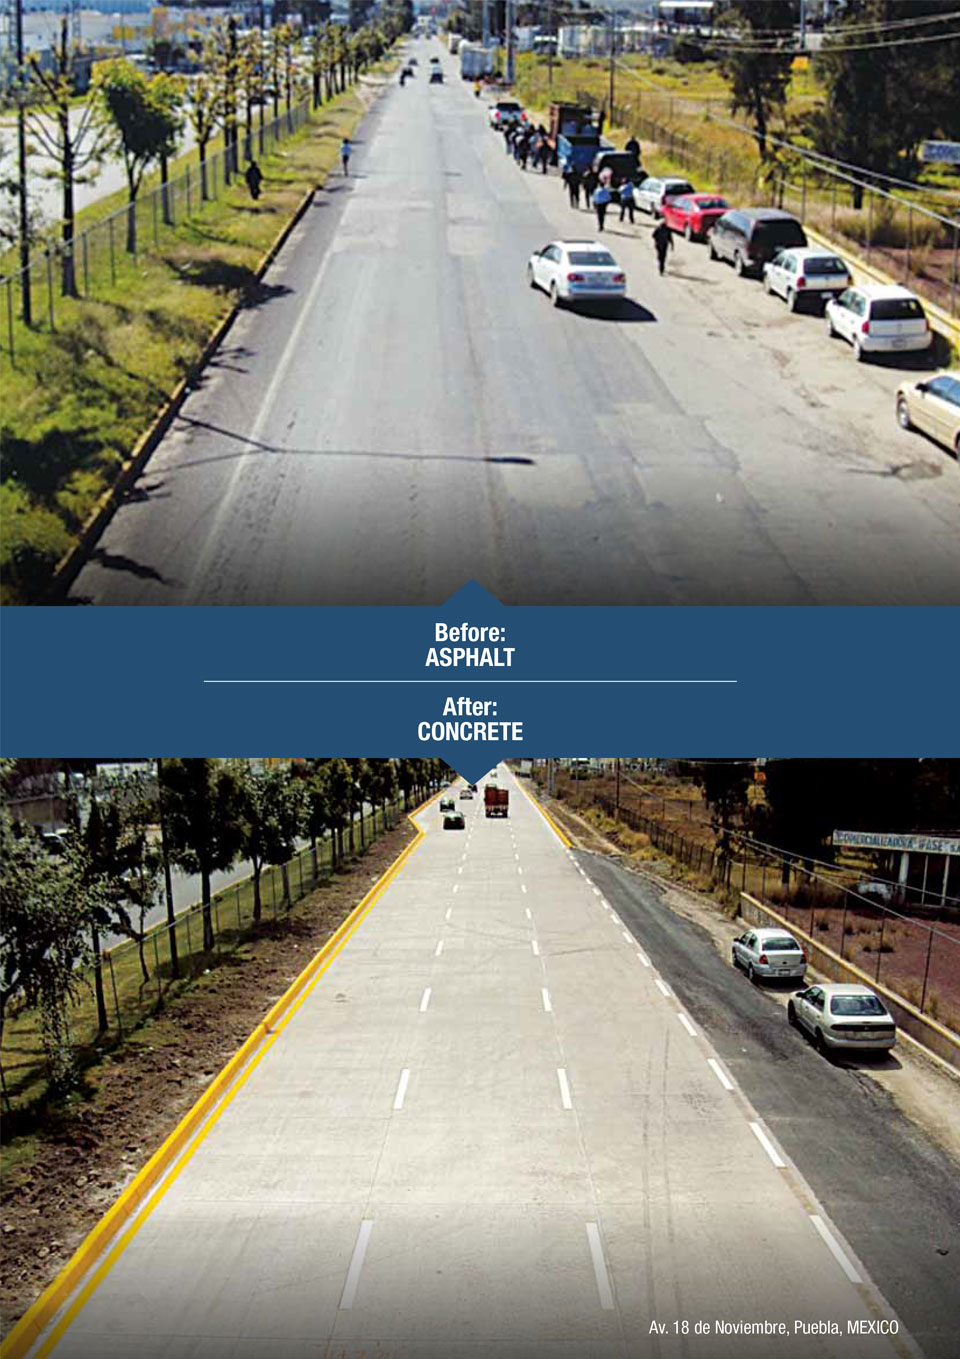 the image shows a before and after of a road with asphalt and then with concrete